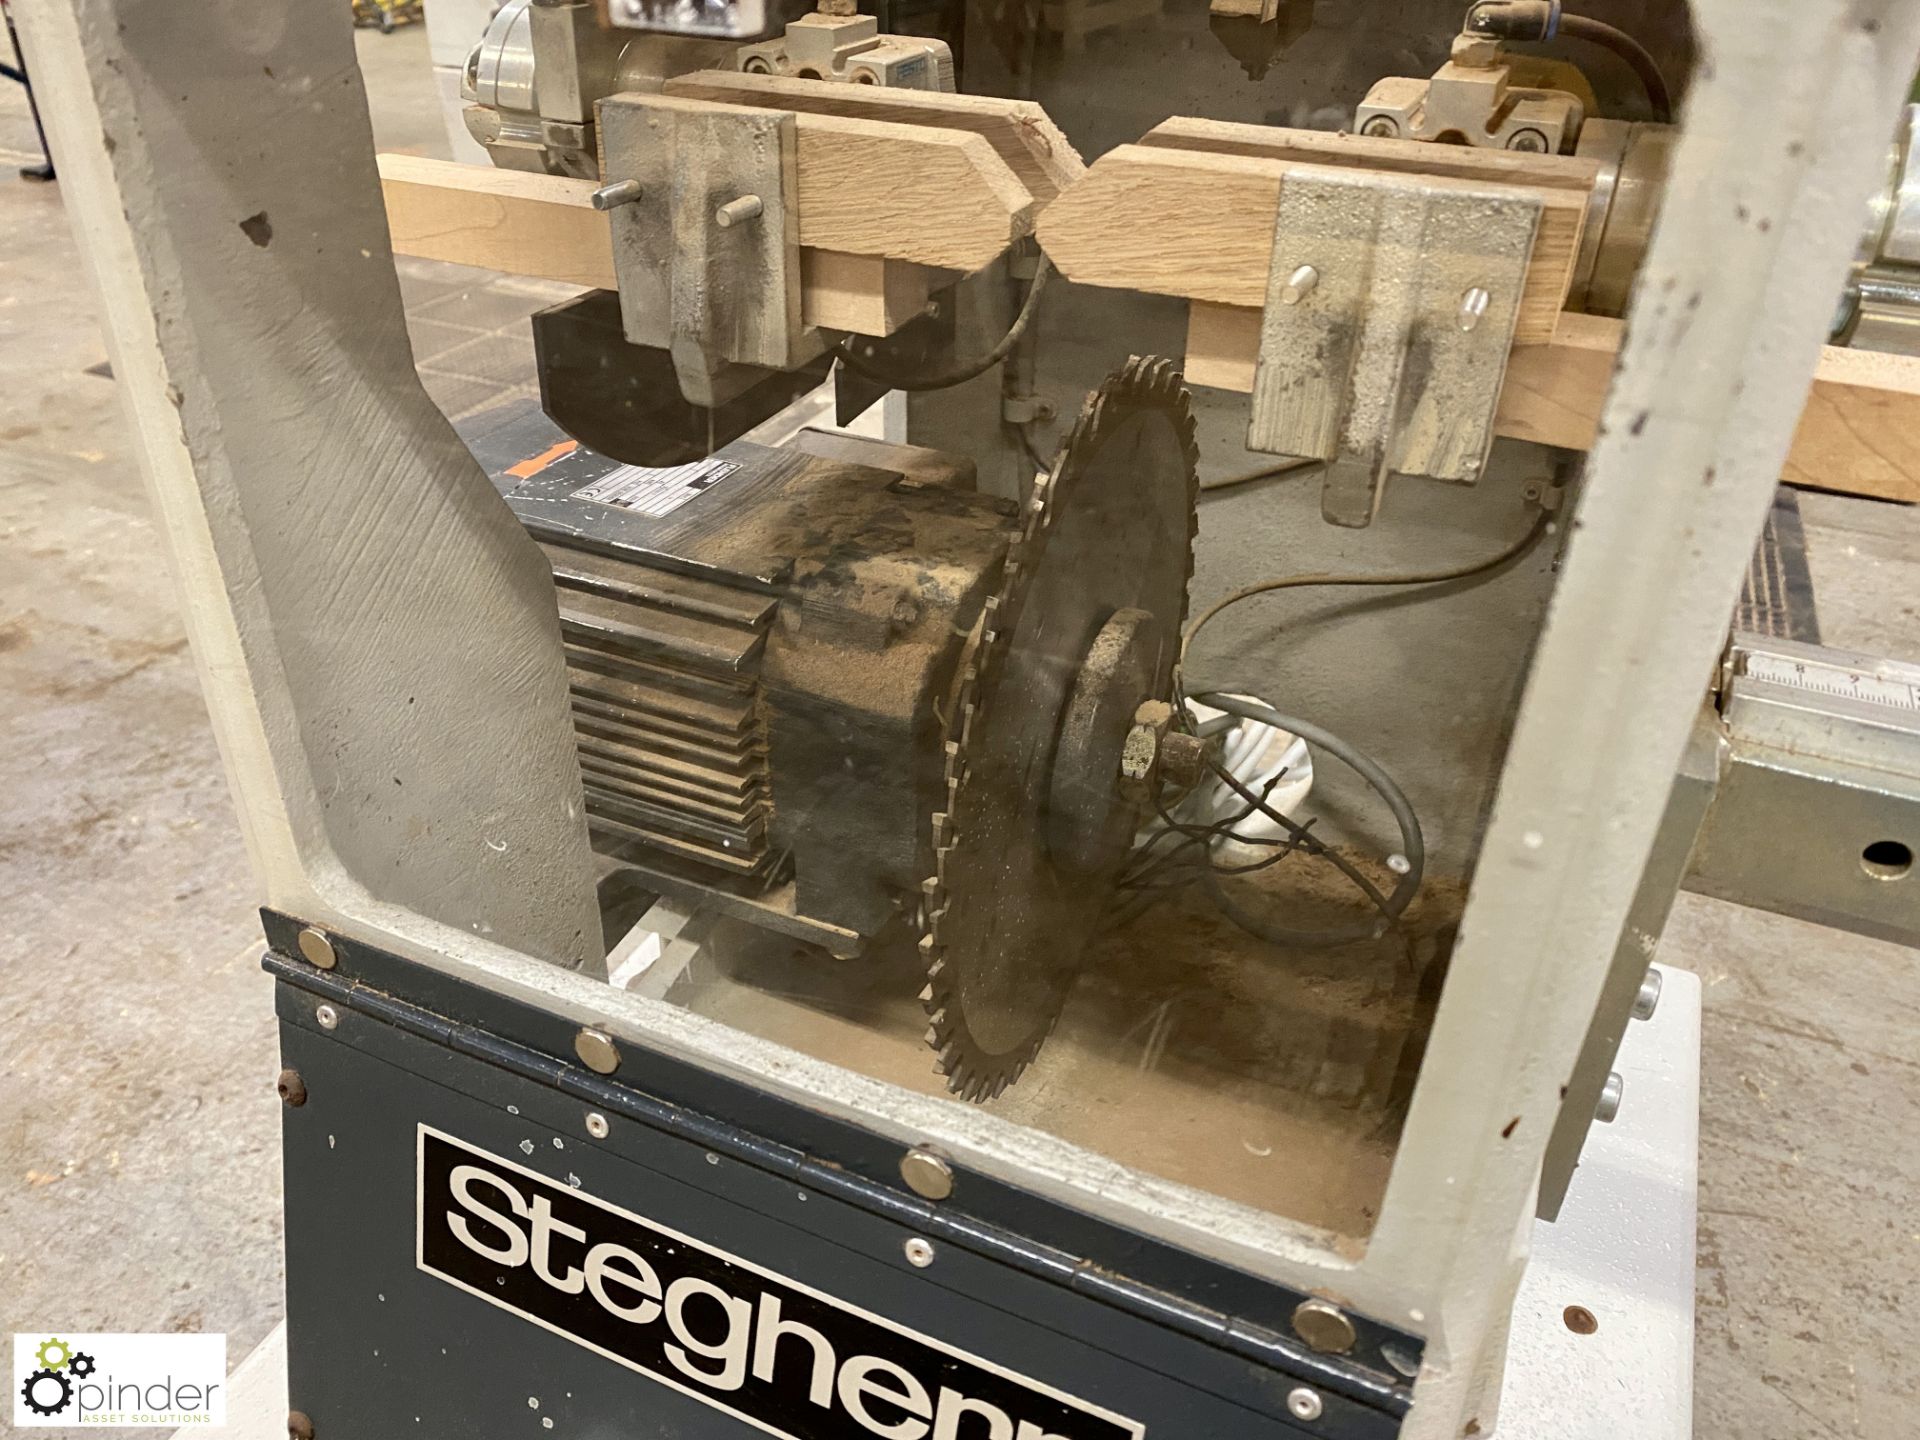 Stegherr KSF-Mini Cross Joint Milling Machine, year 2006, serial number 31/0506-1, 415volts - Image 3 of 8